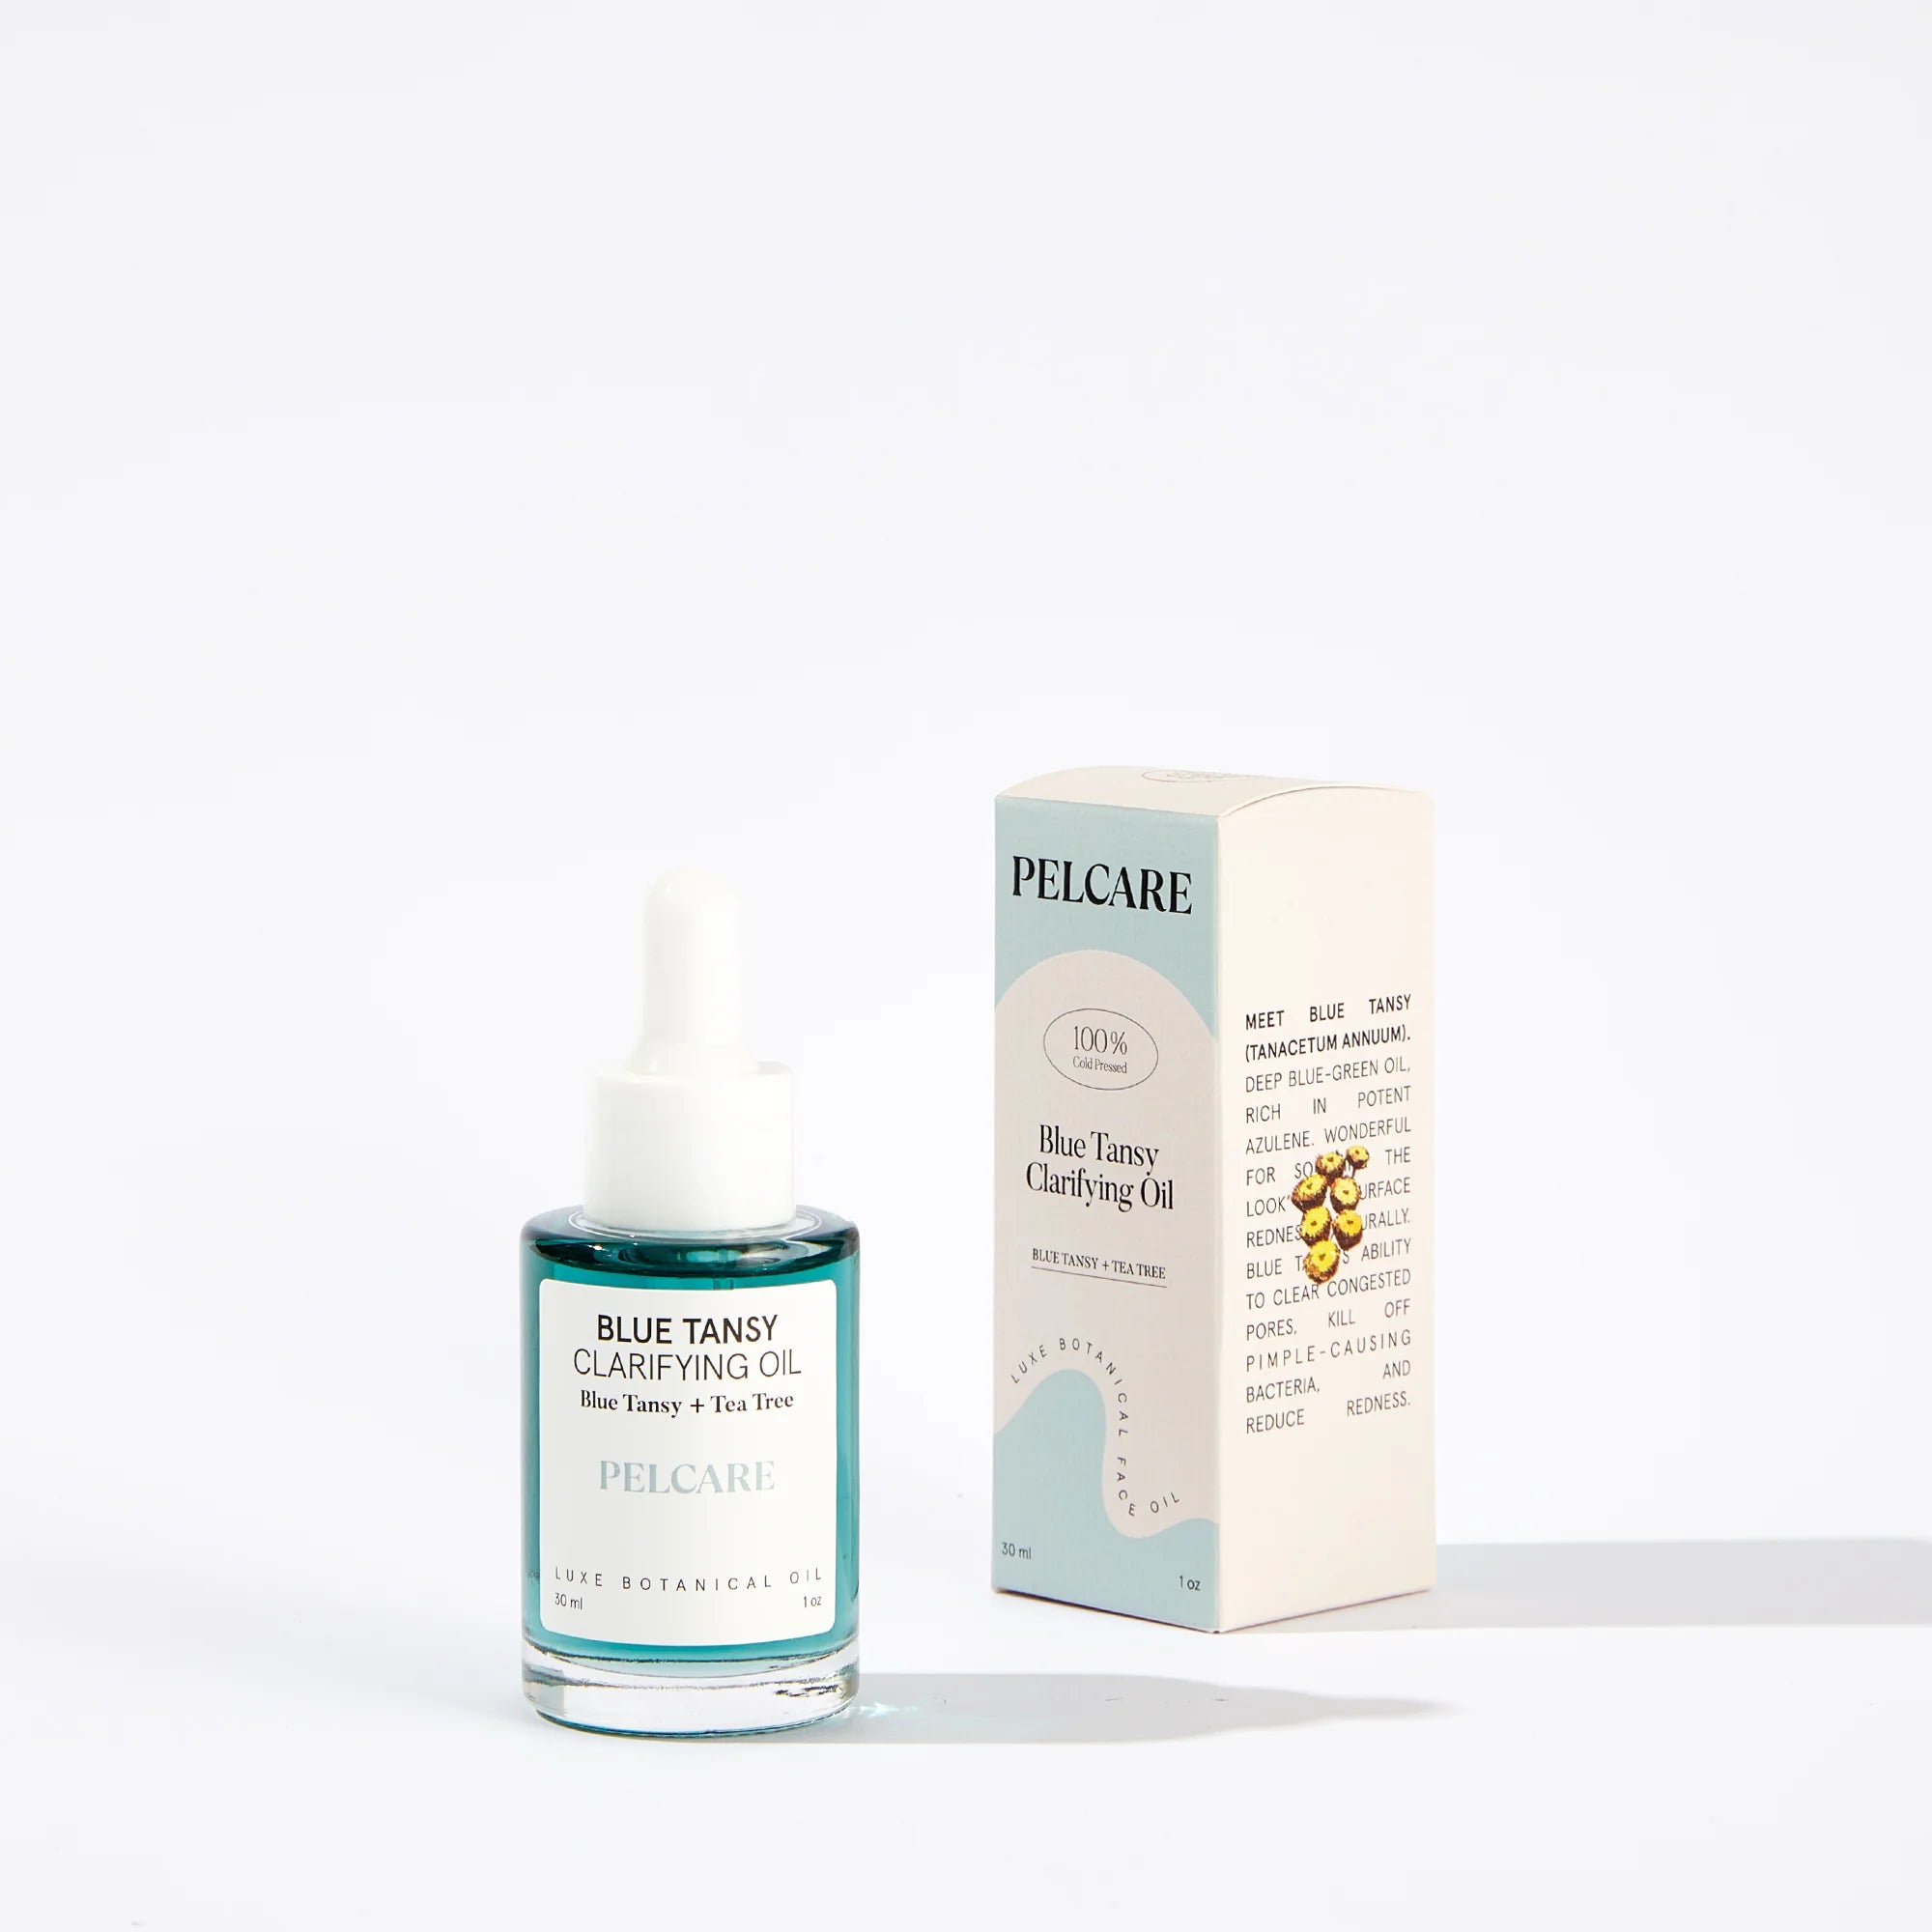 Blue Tansy Clarifying Oil - against acne